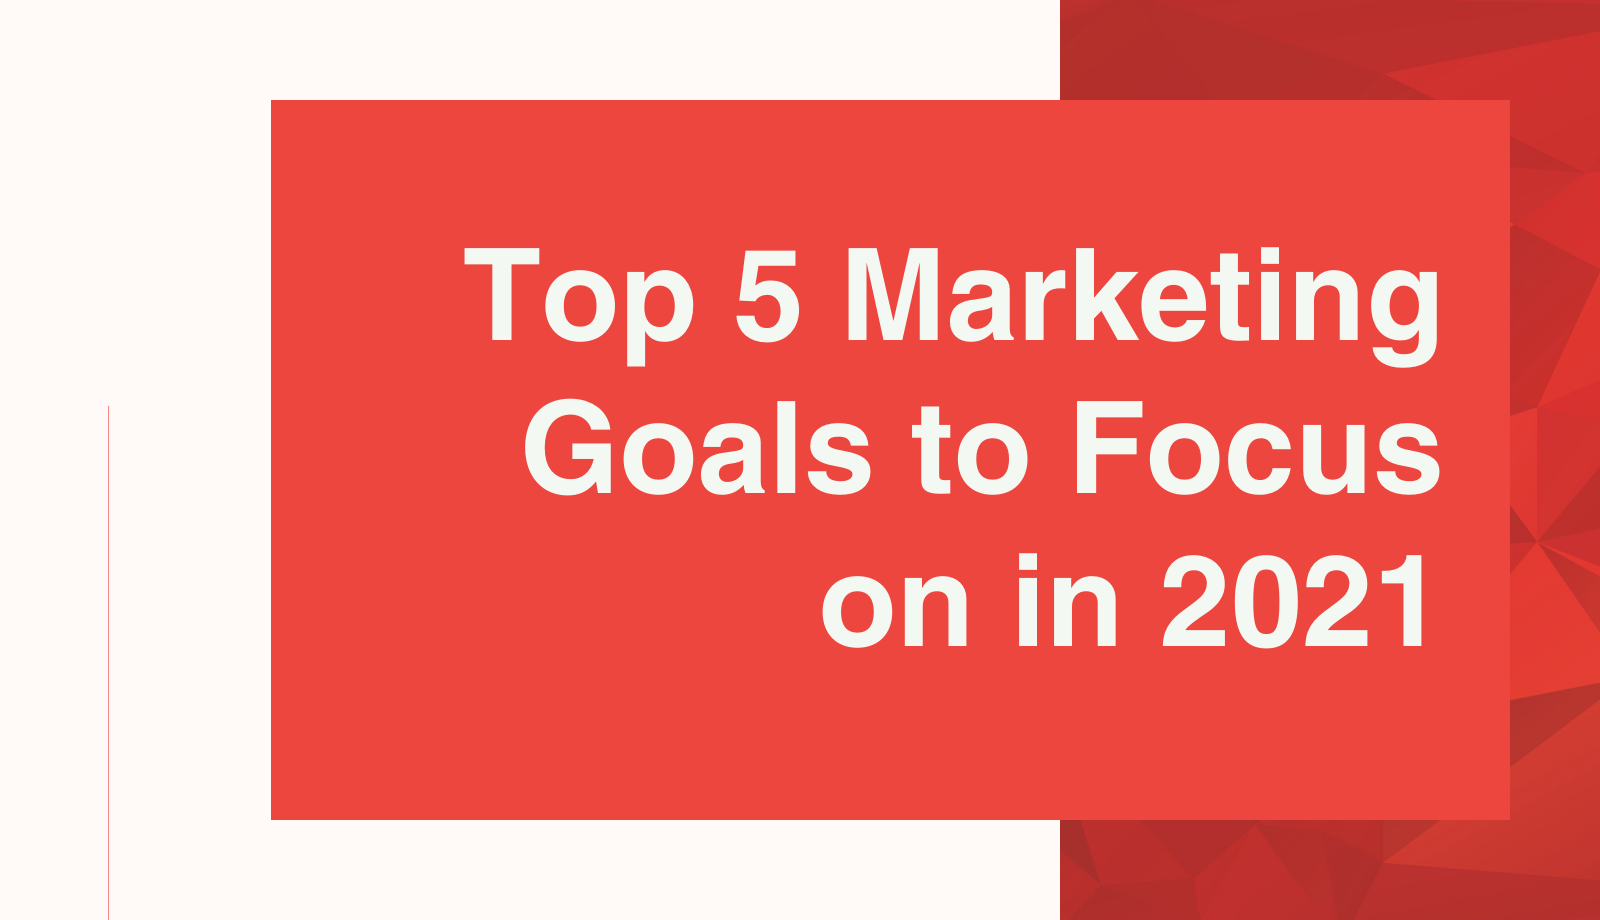 Top 5 Marketing Goals to Focus on in 2021